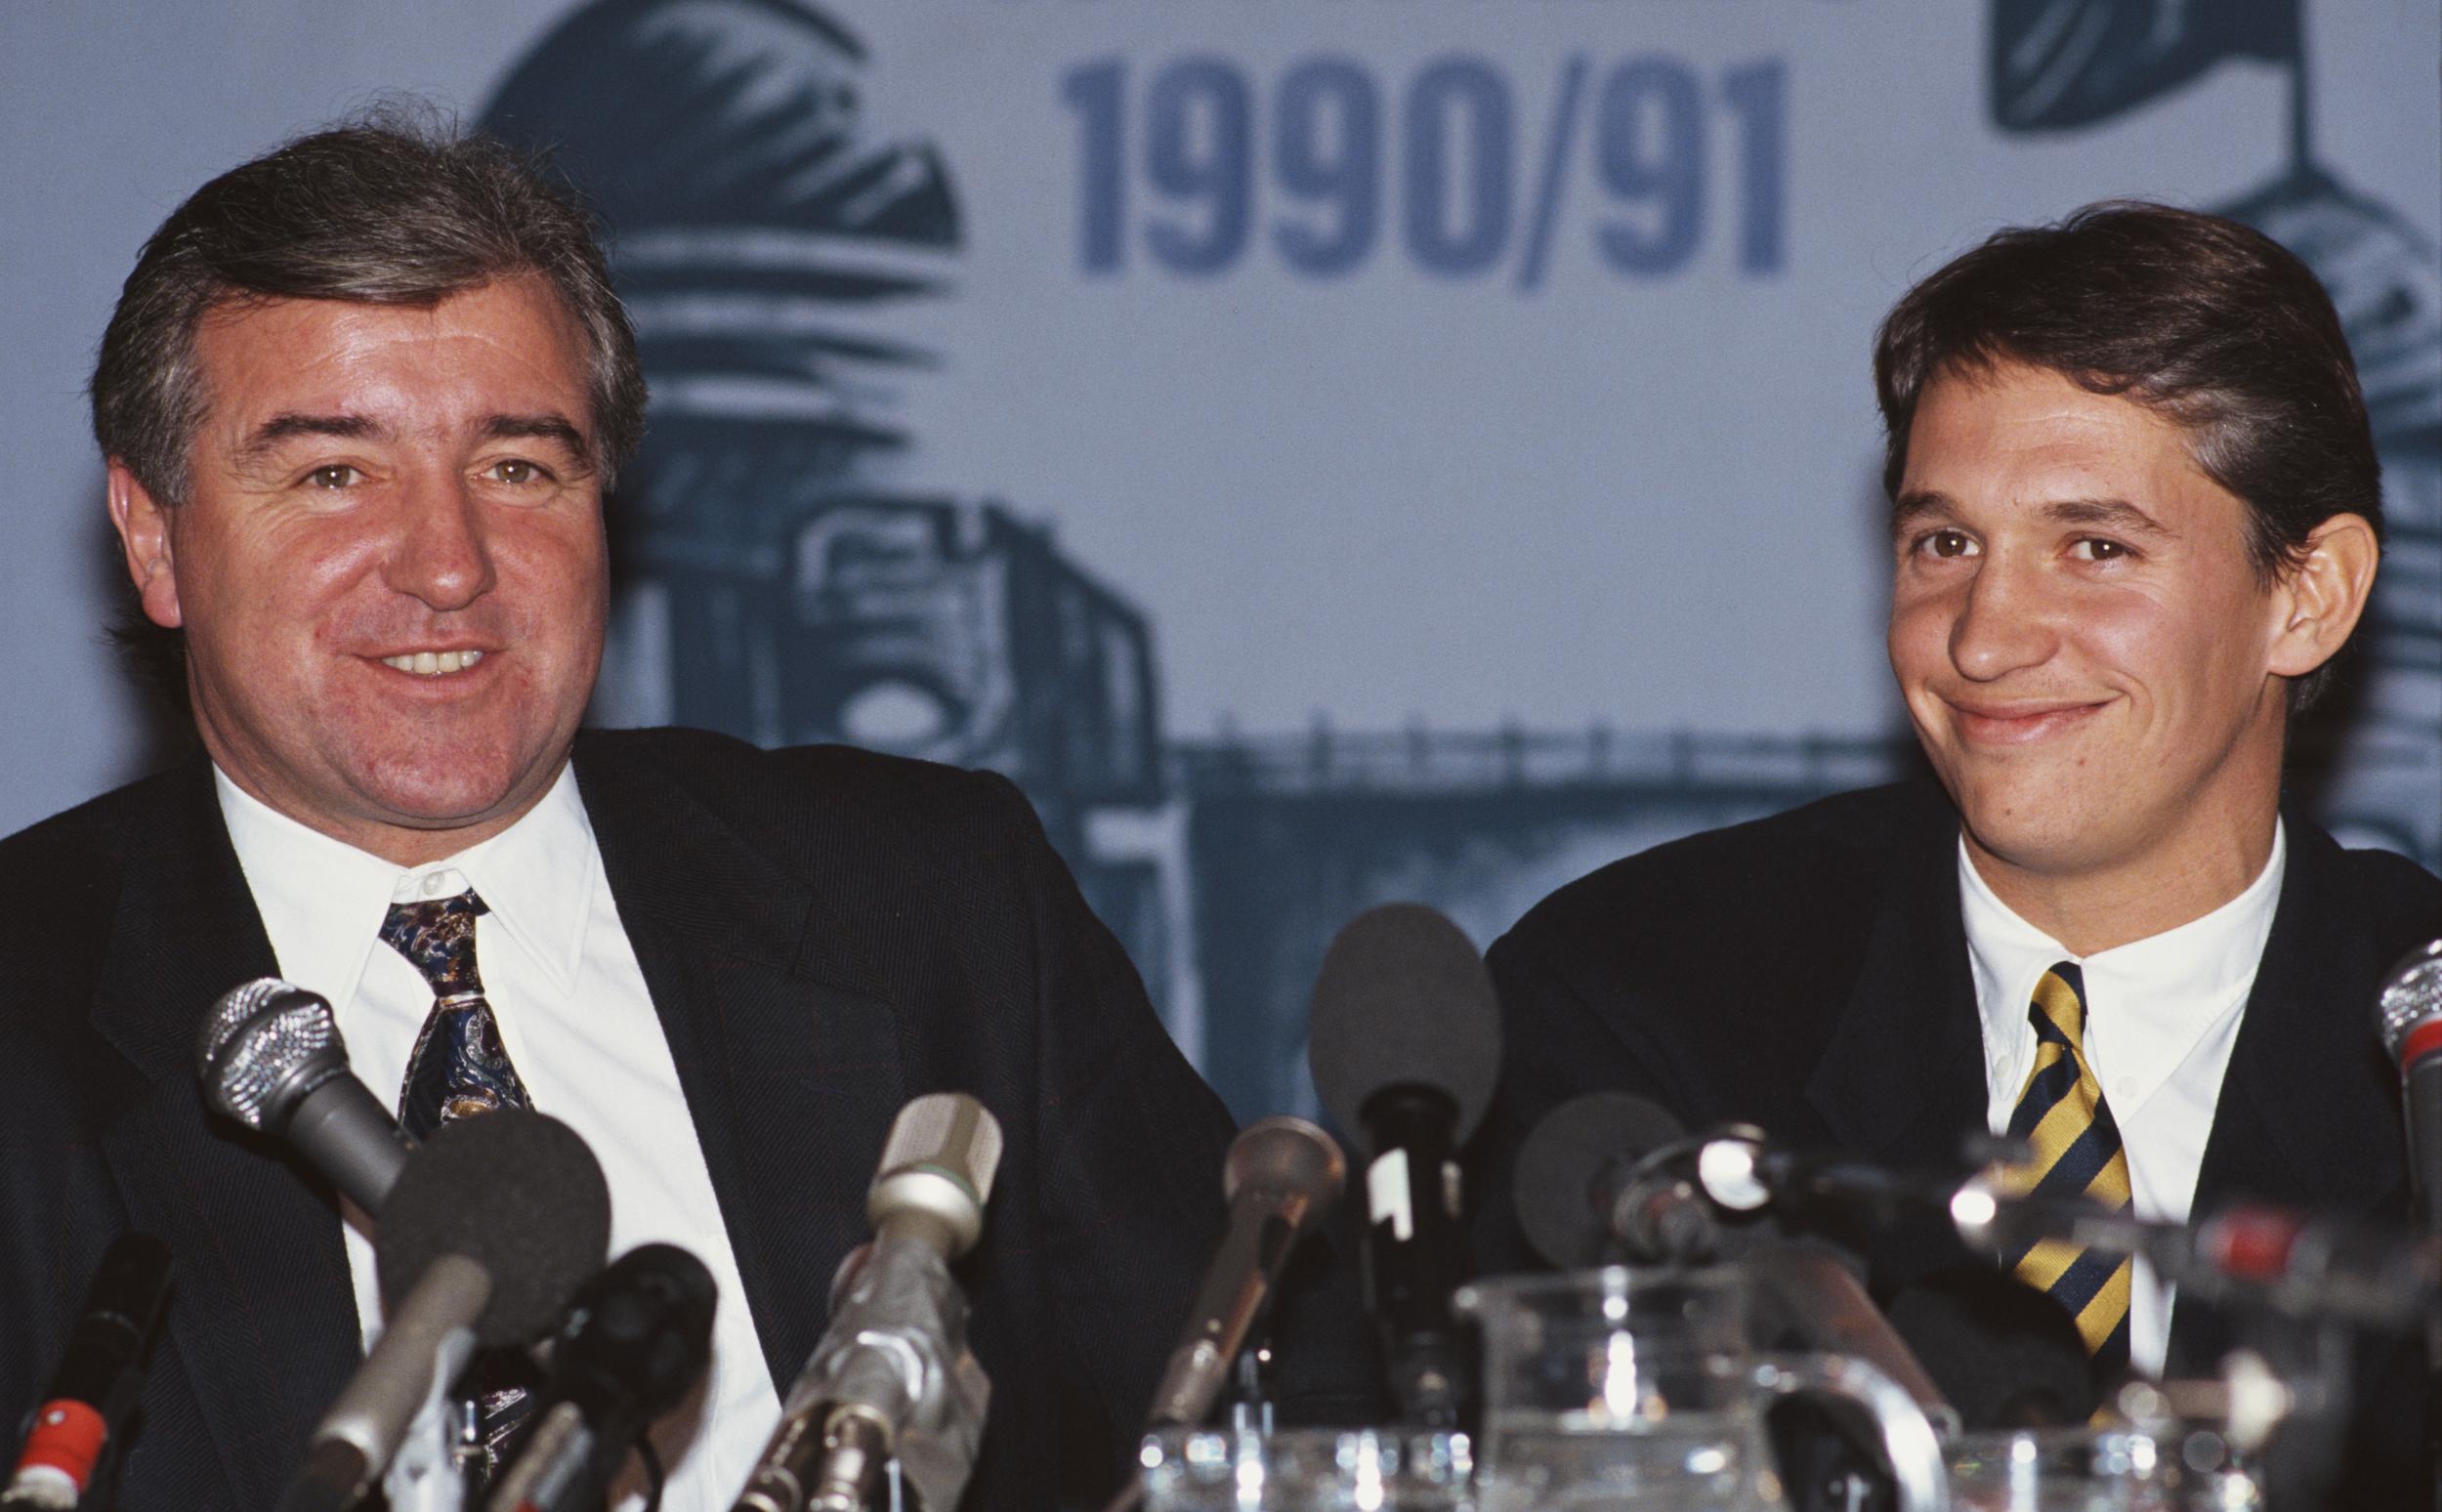 &#13;
Dinner companion Terry Venables (left) unwittingly gave Jones a scoop in 1991 (Getty)&#13;